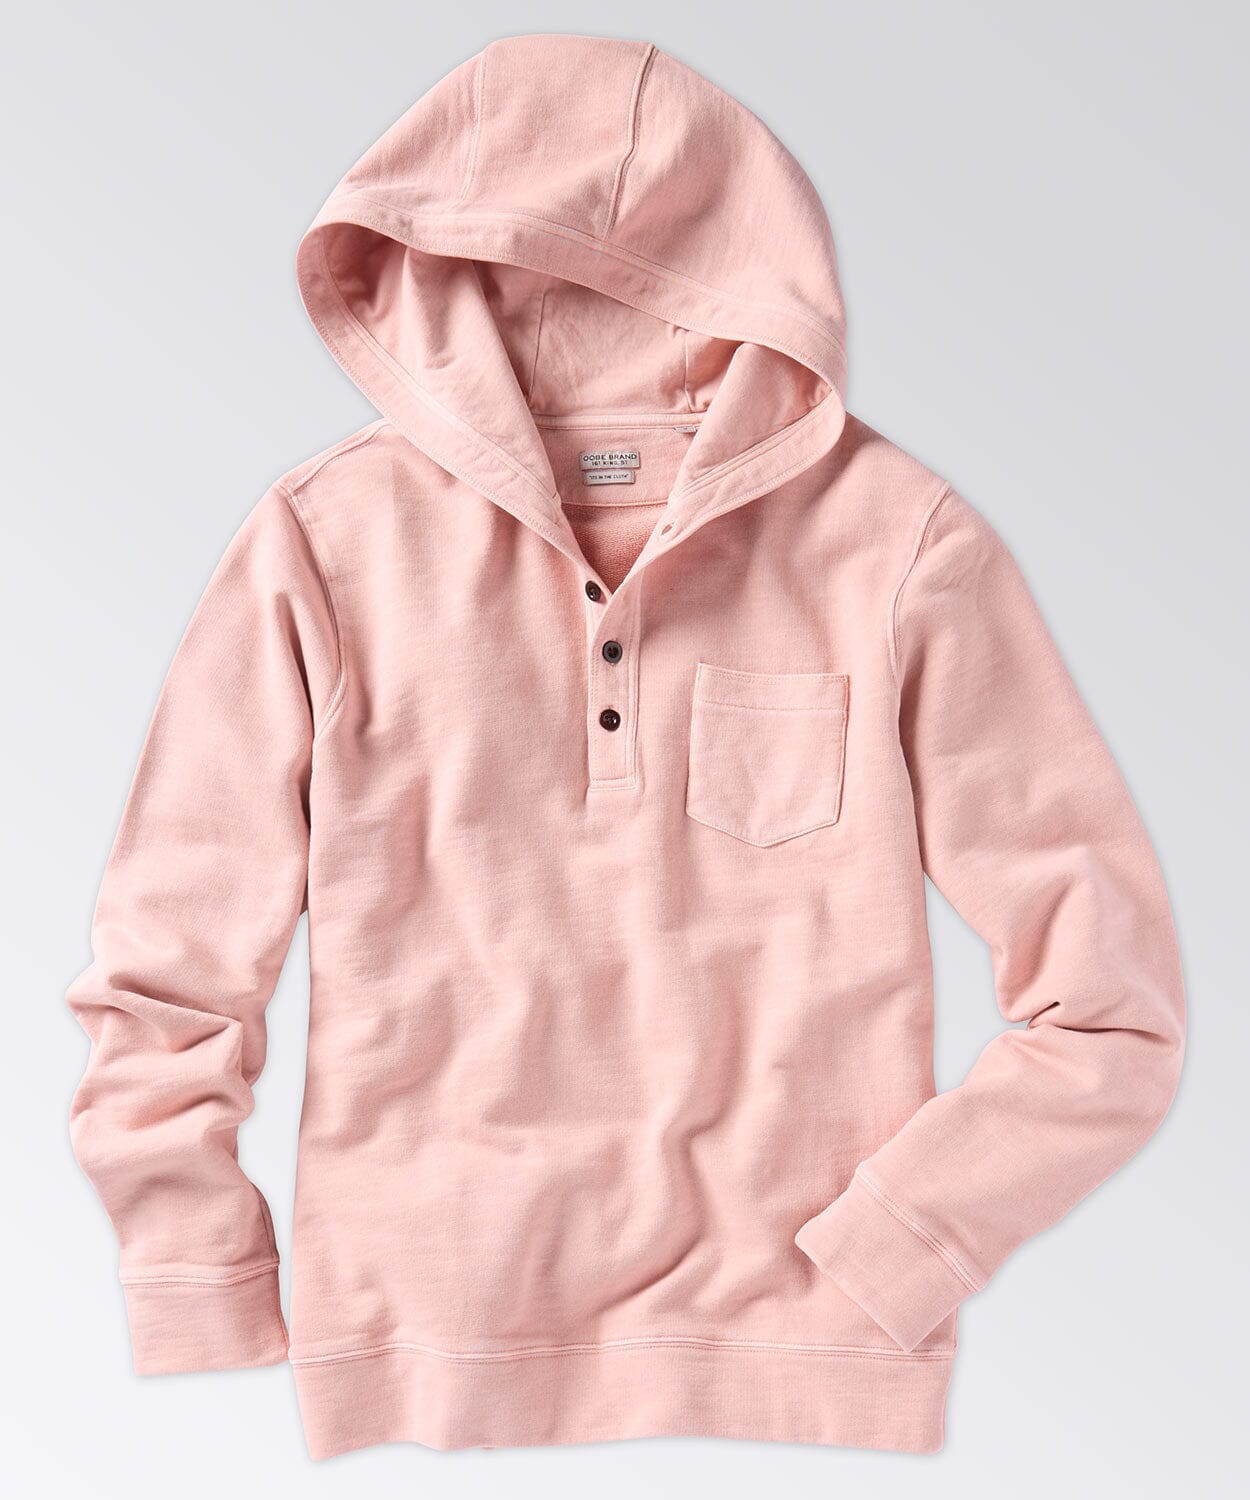 Hatteras Hoodie Knits OOBE BRAND Shell S 